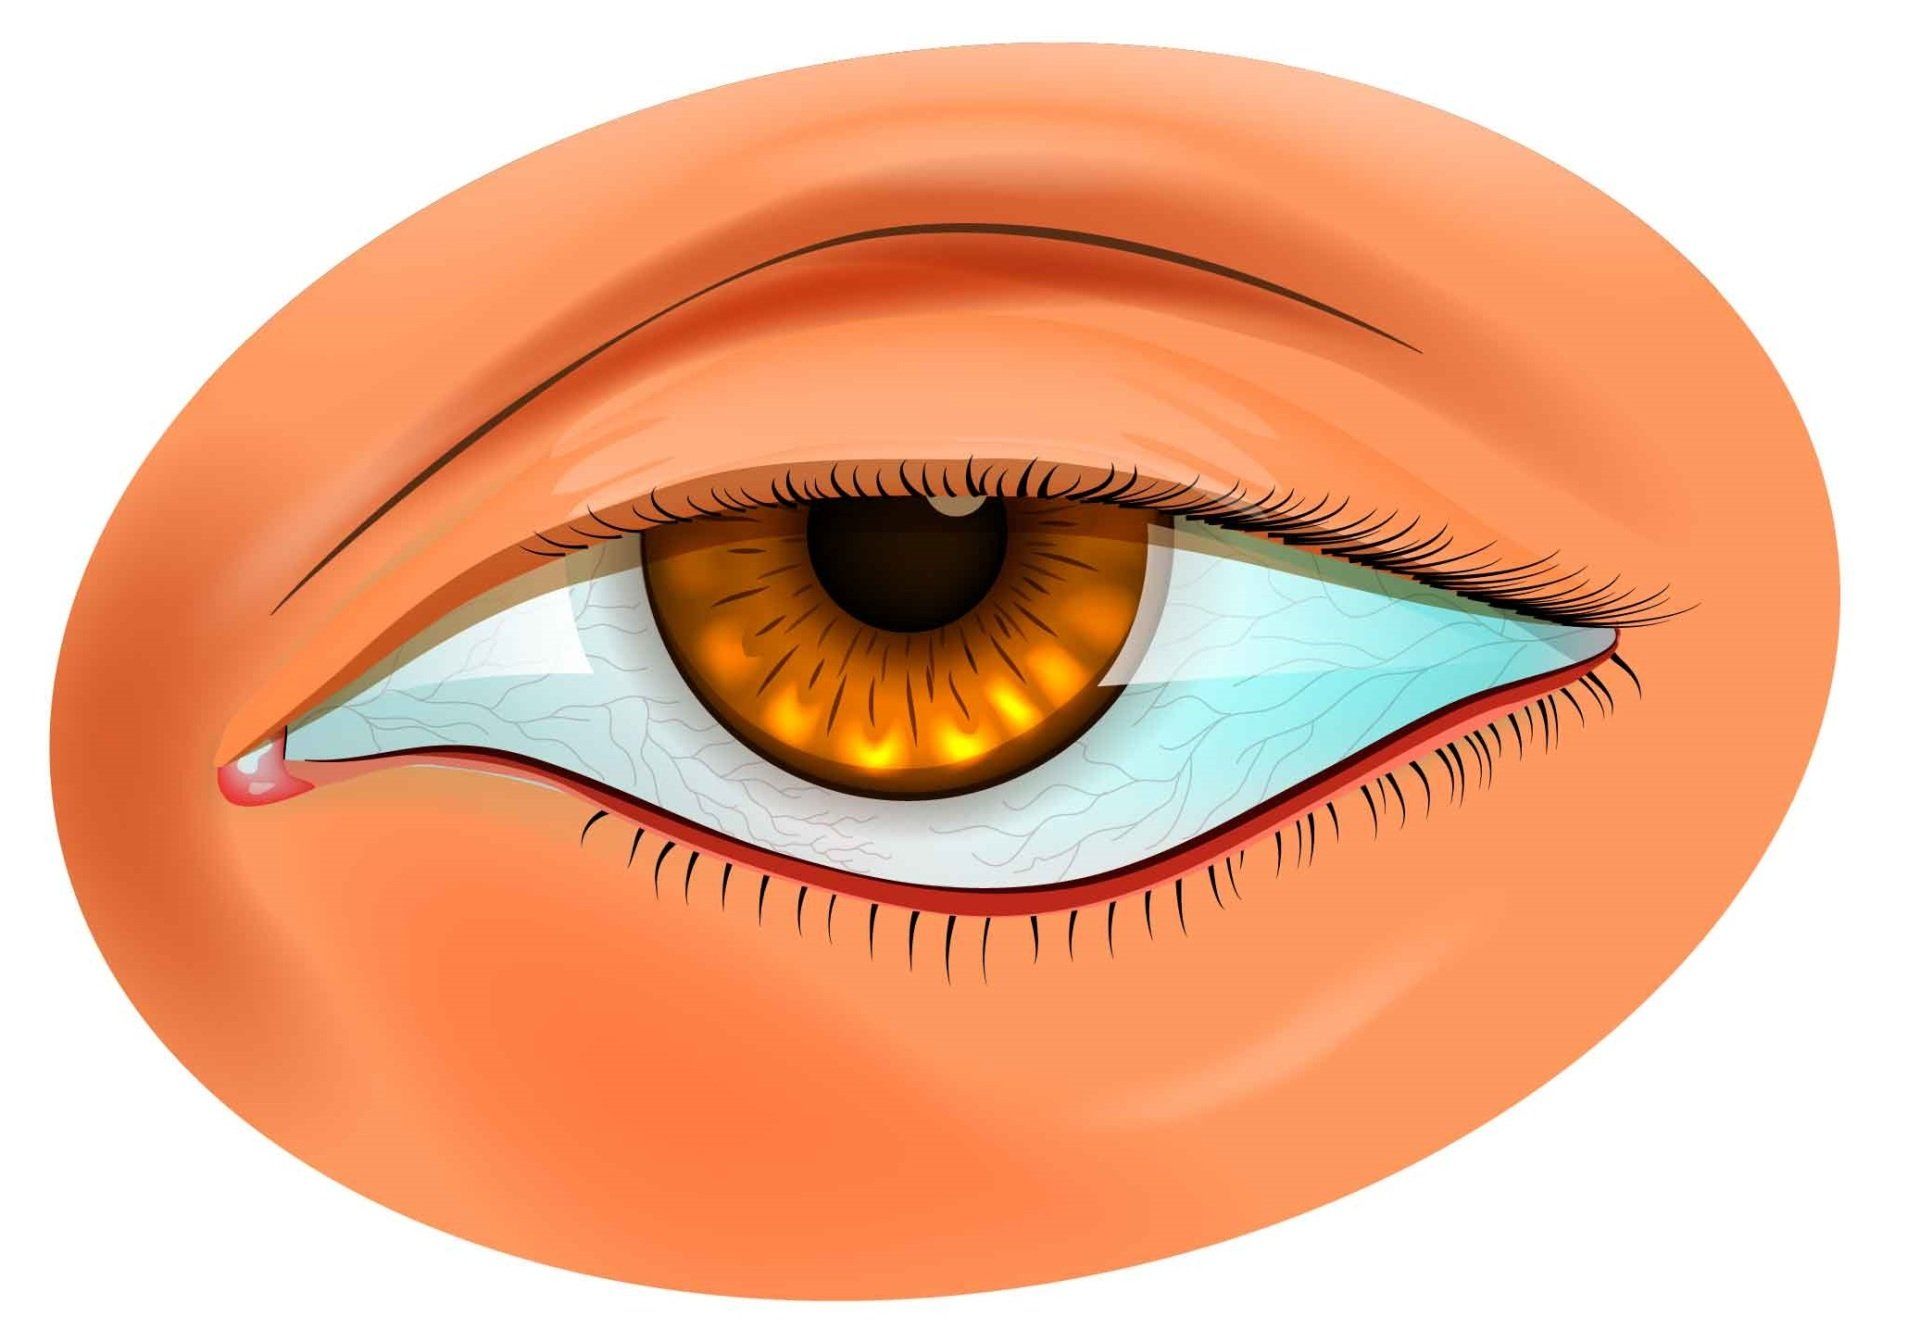 Ptosis showing drooping of the upper eyelid